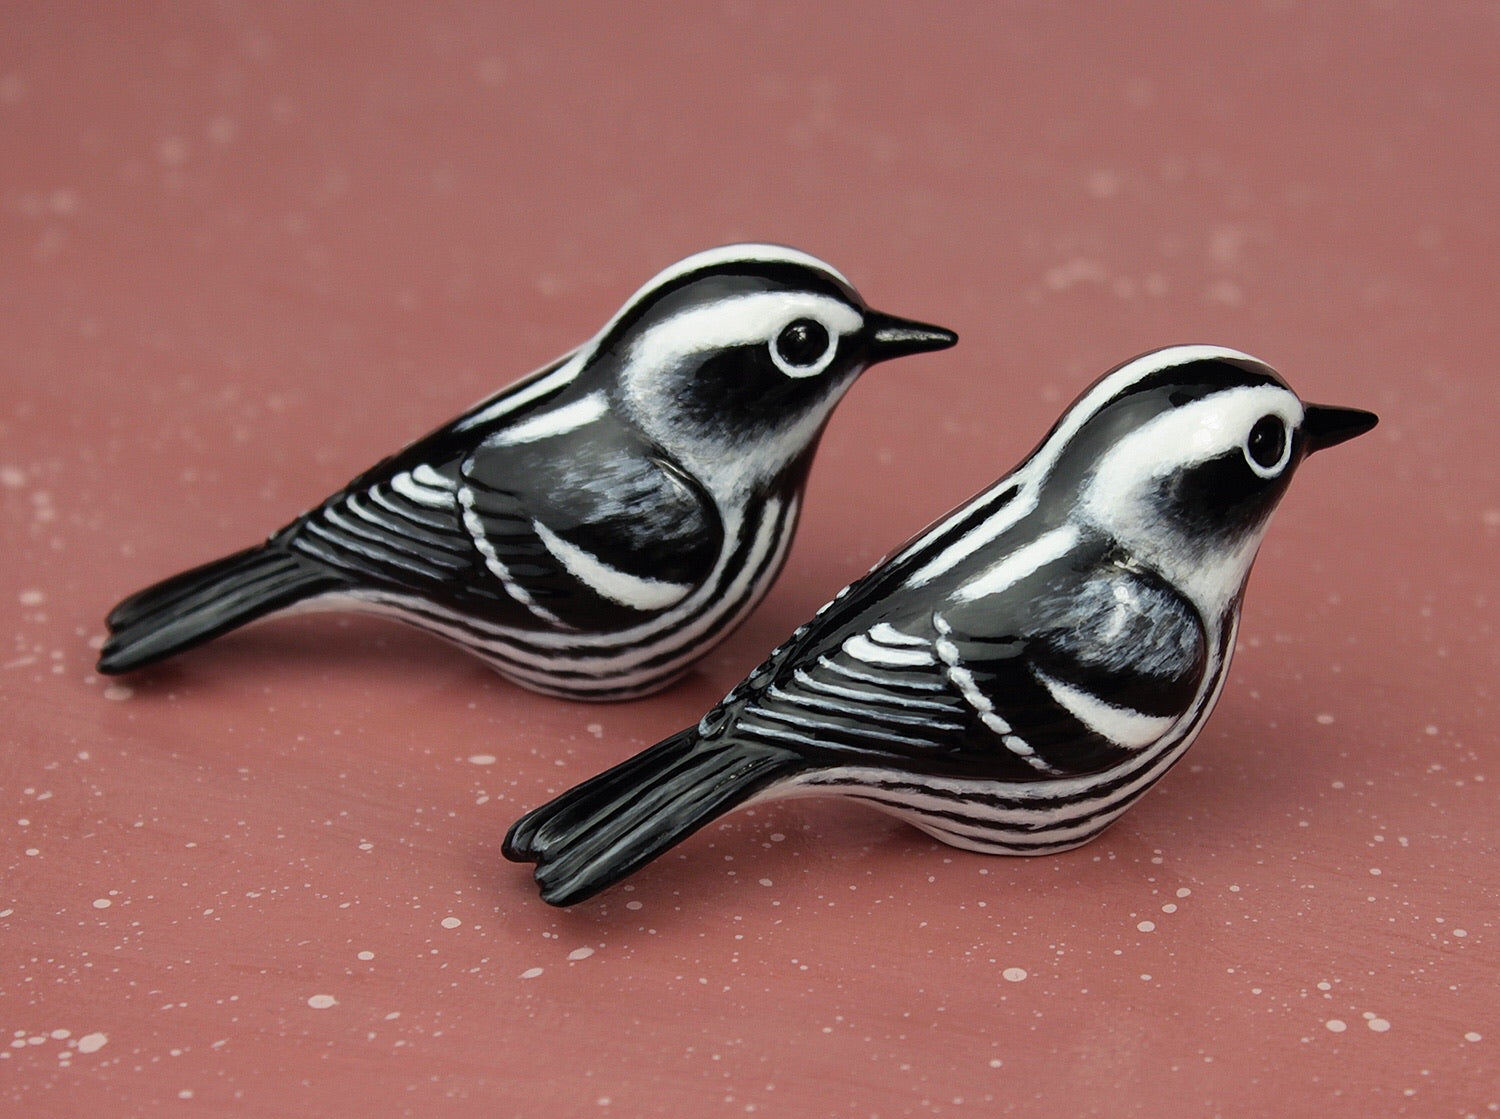 Black and white warbler figurines